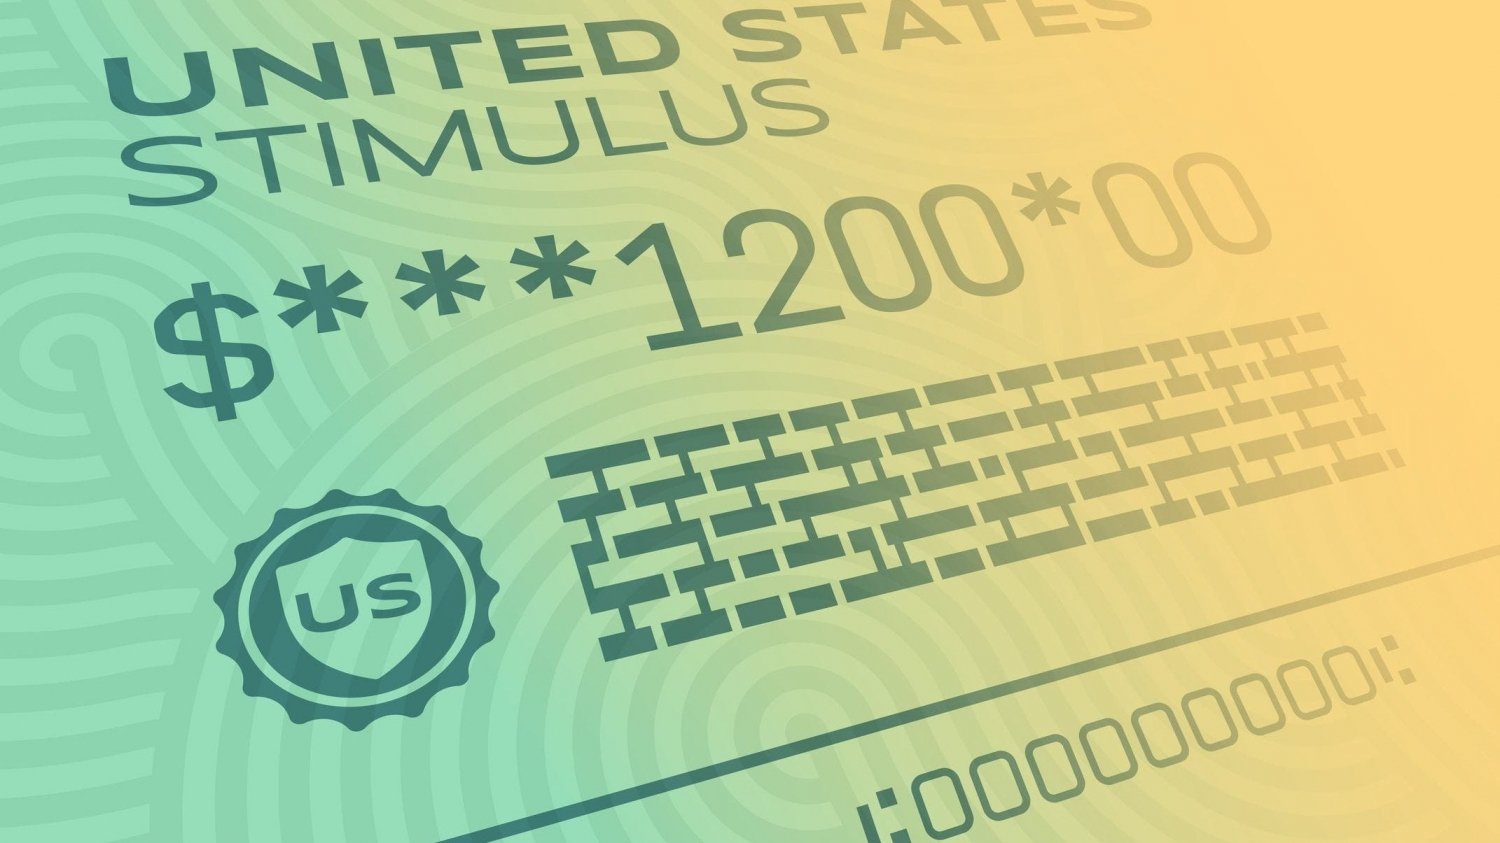 Here's what you need to know about the 1200 stimulus coming in August